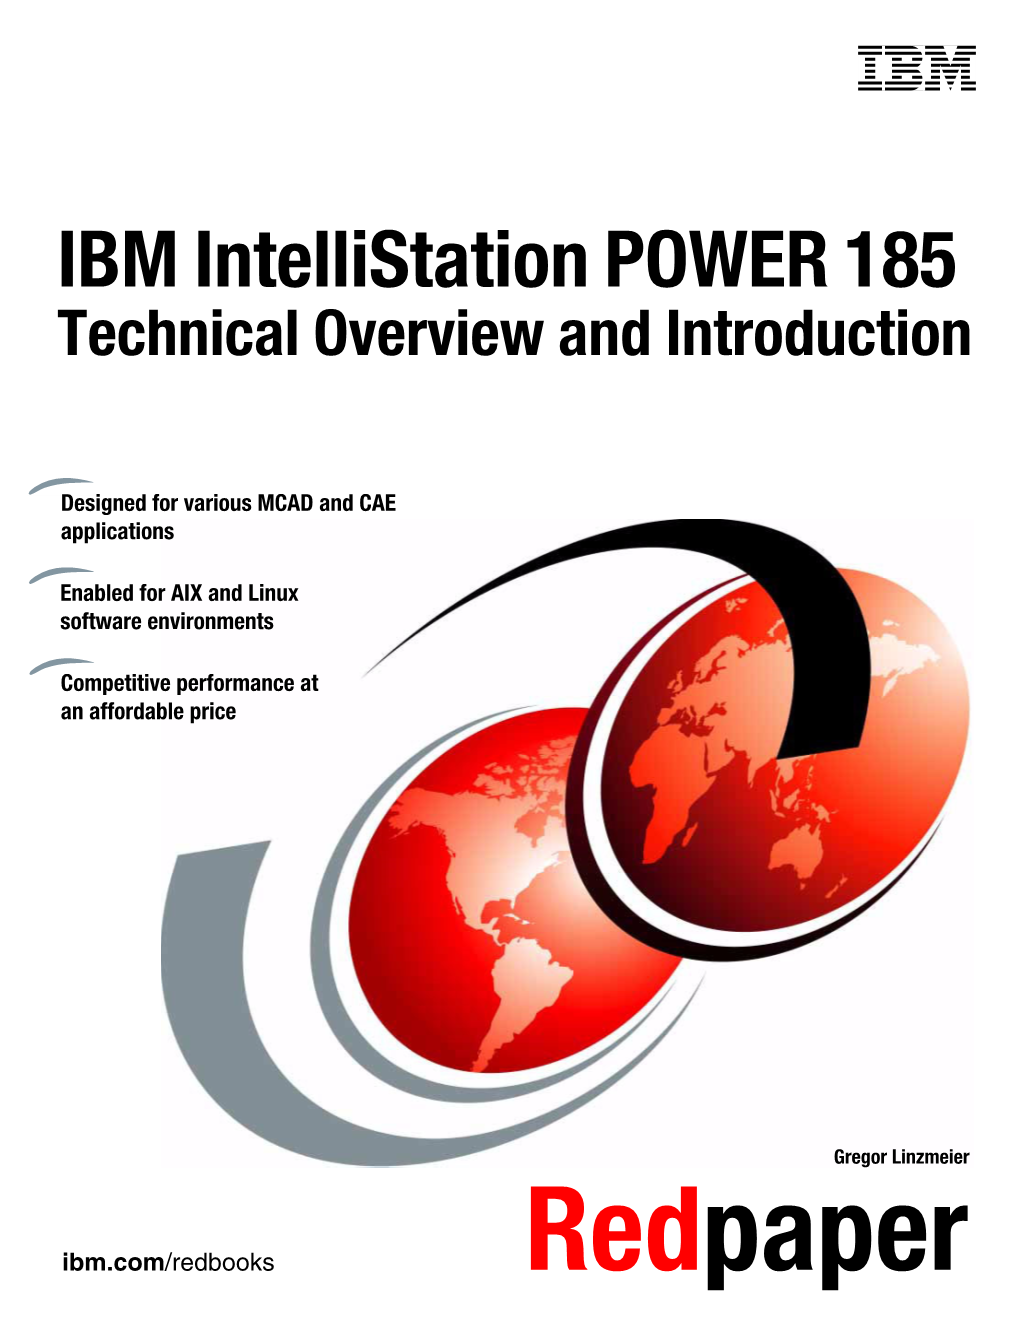 IBM Intellistation POWER 185 Technical Overview and Introduction